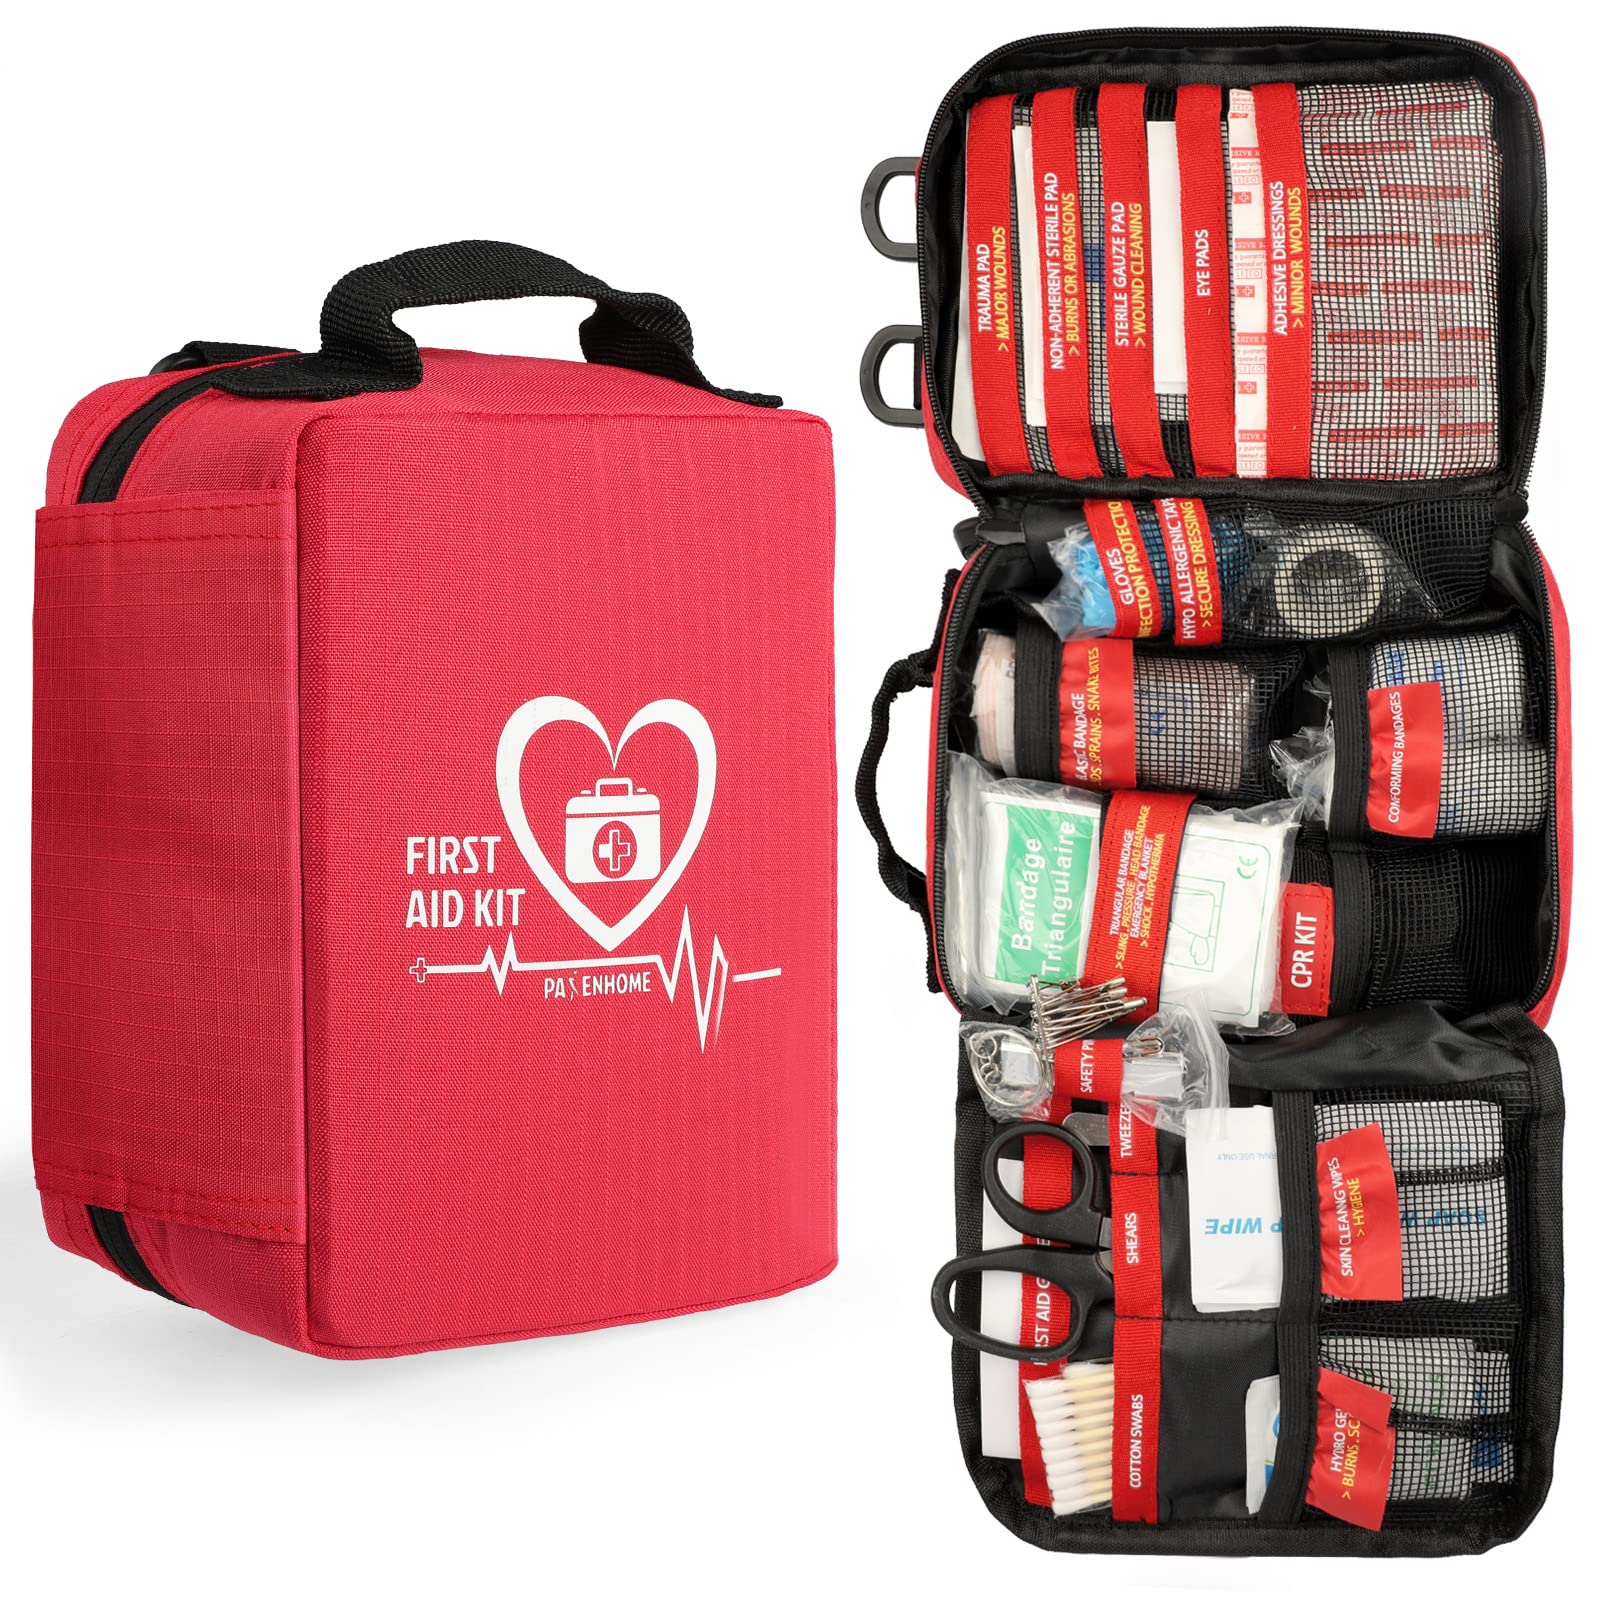 Pasenhome Comprehensive First Aid Kit - Trauma Kit with Labelled